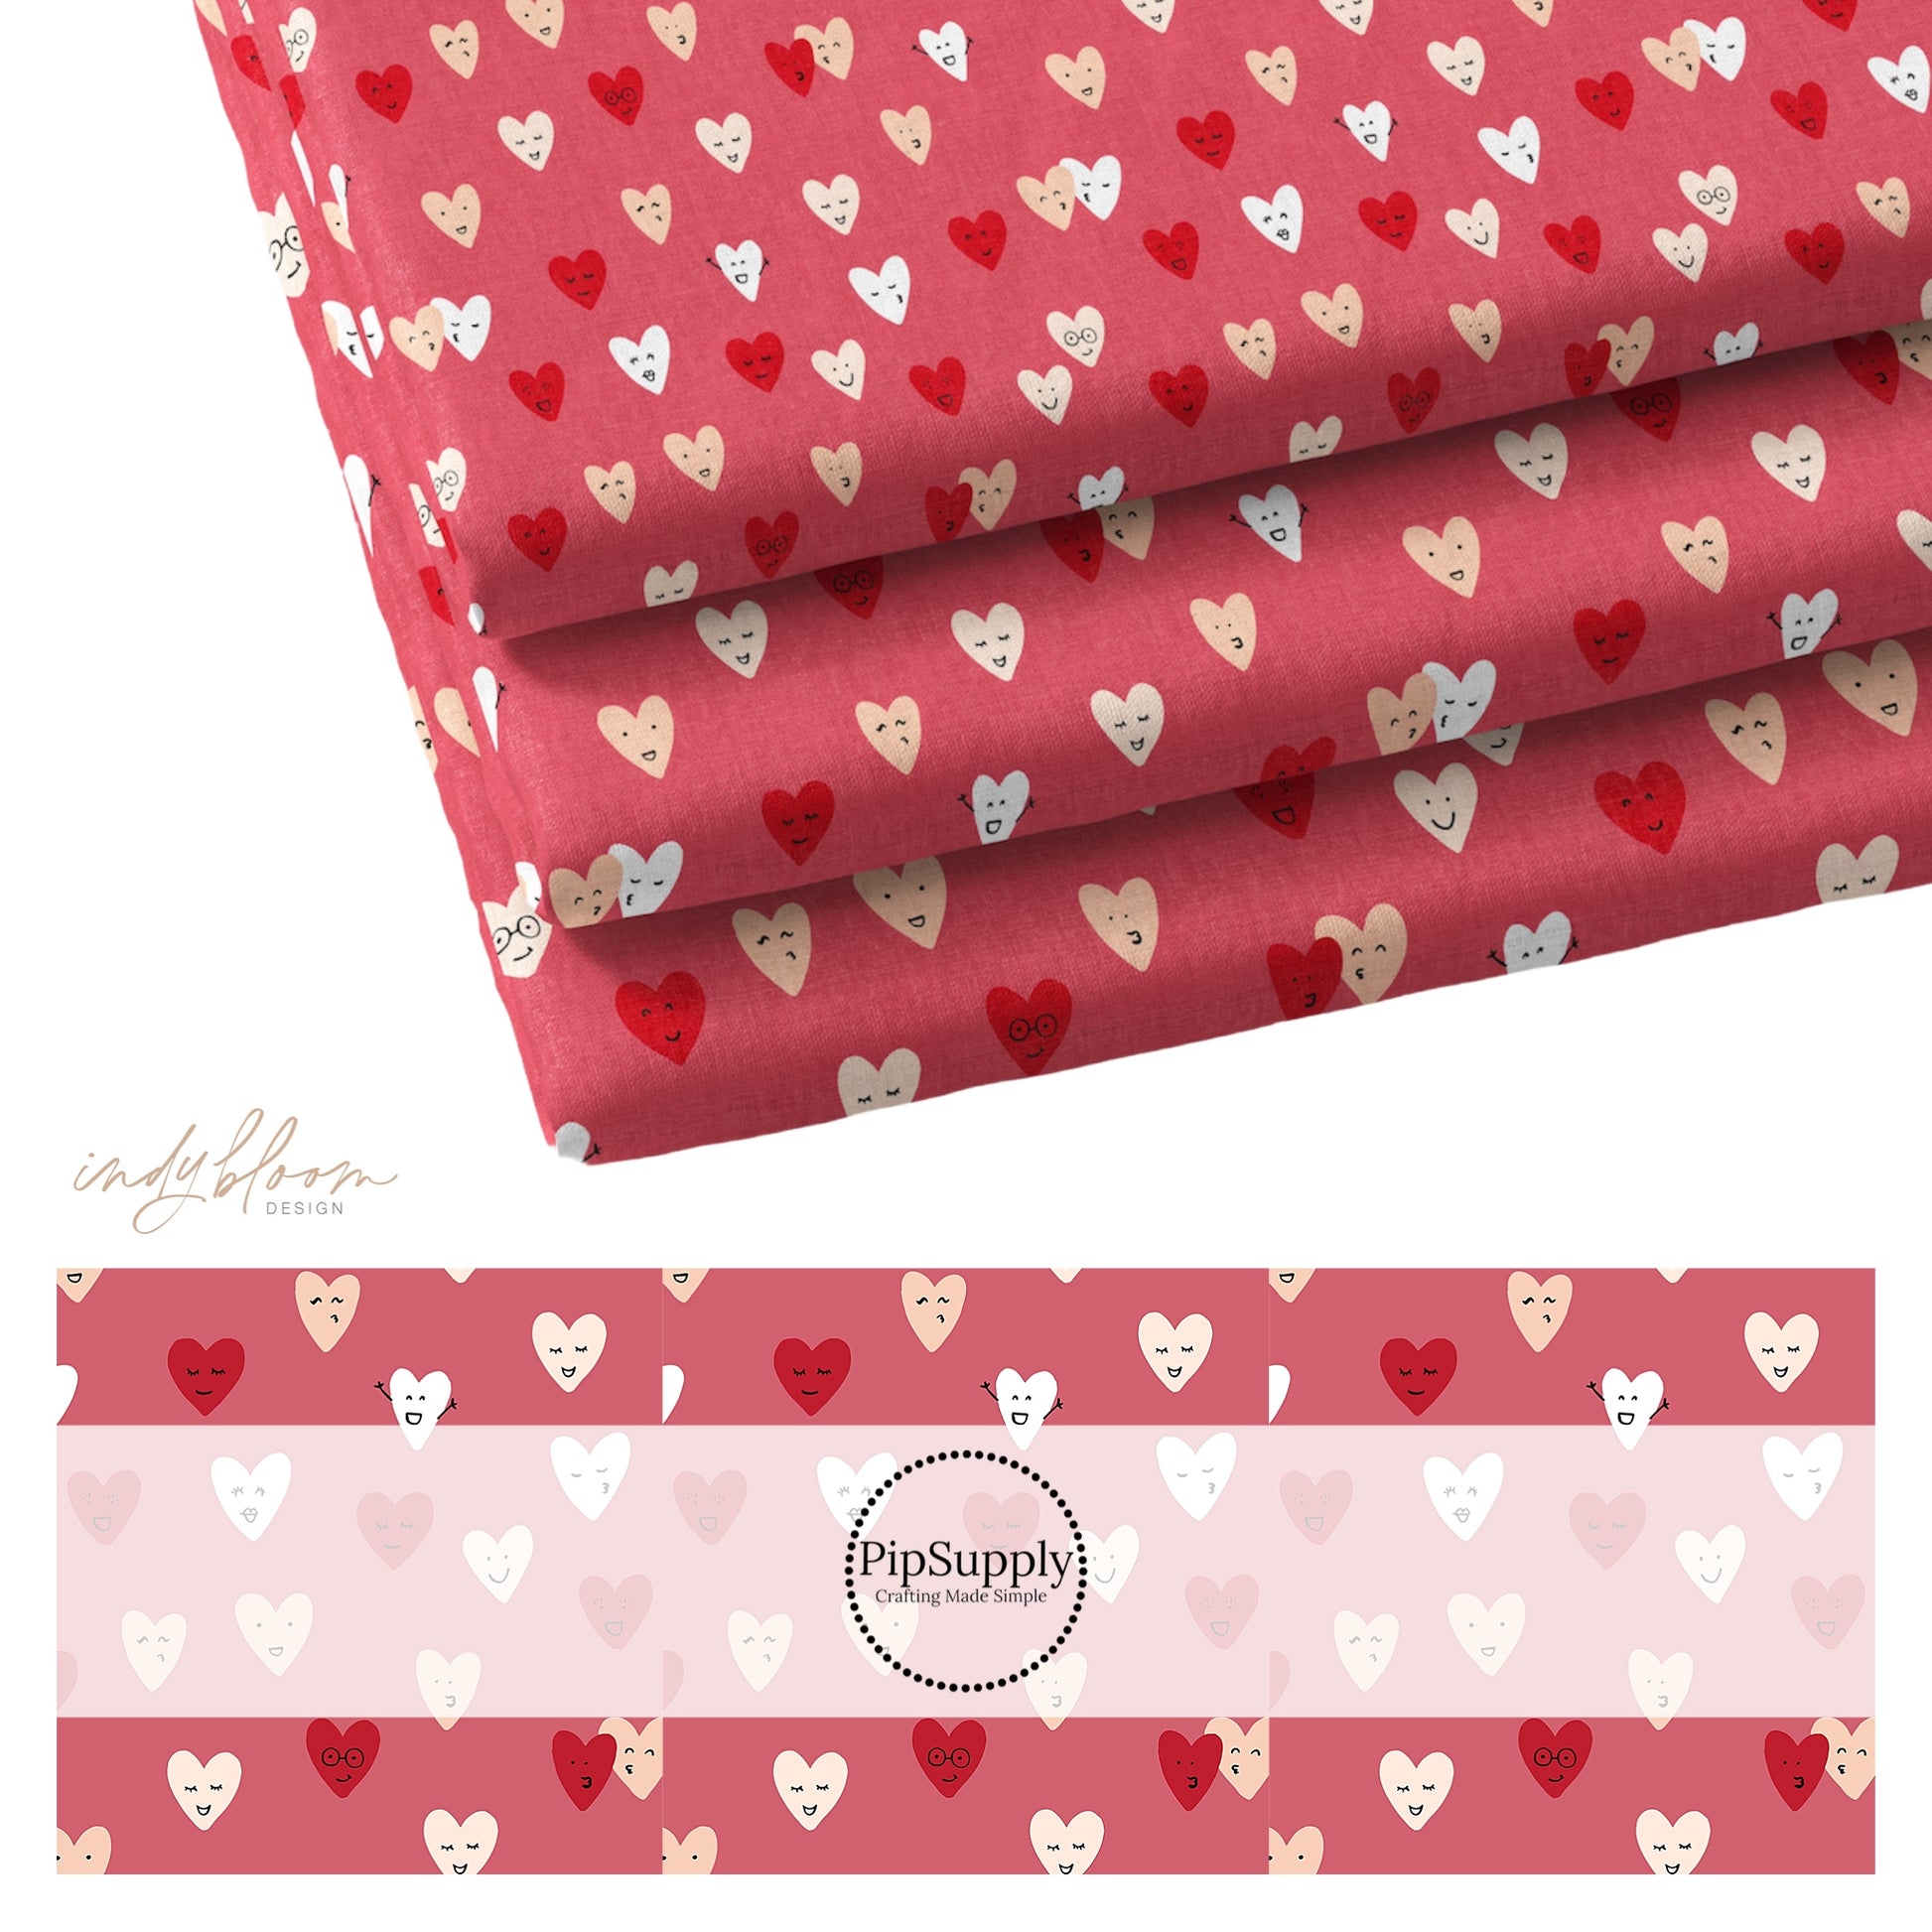 Magenta colored fabric with animated red and white hearts